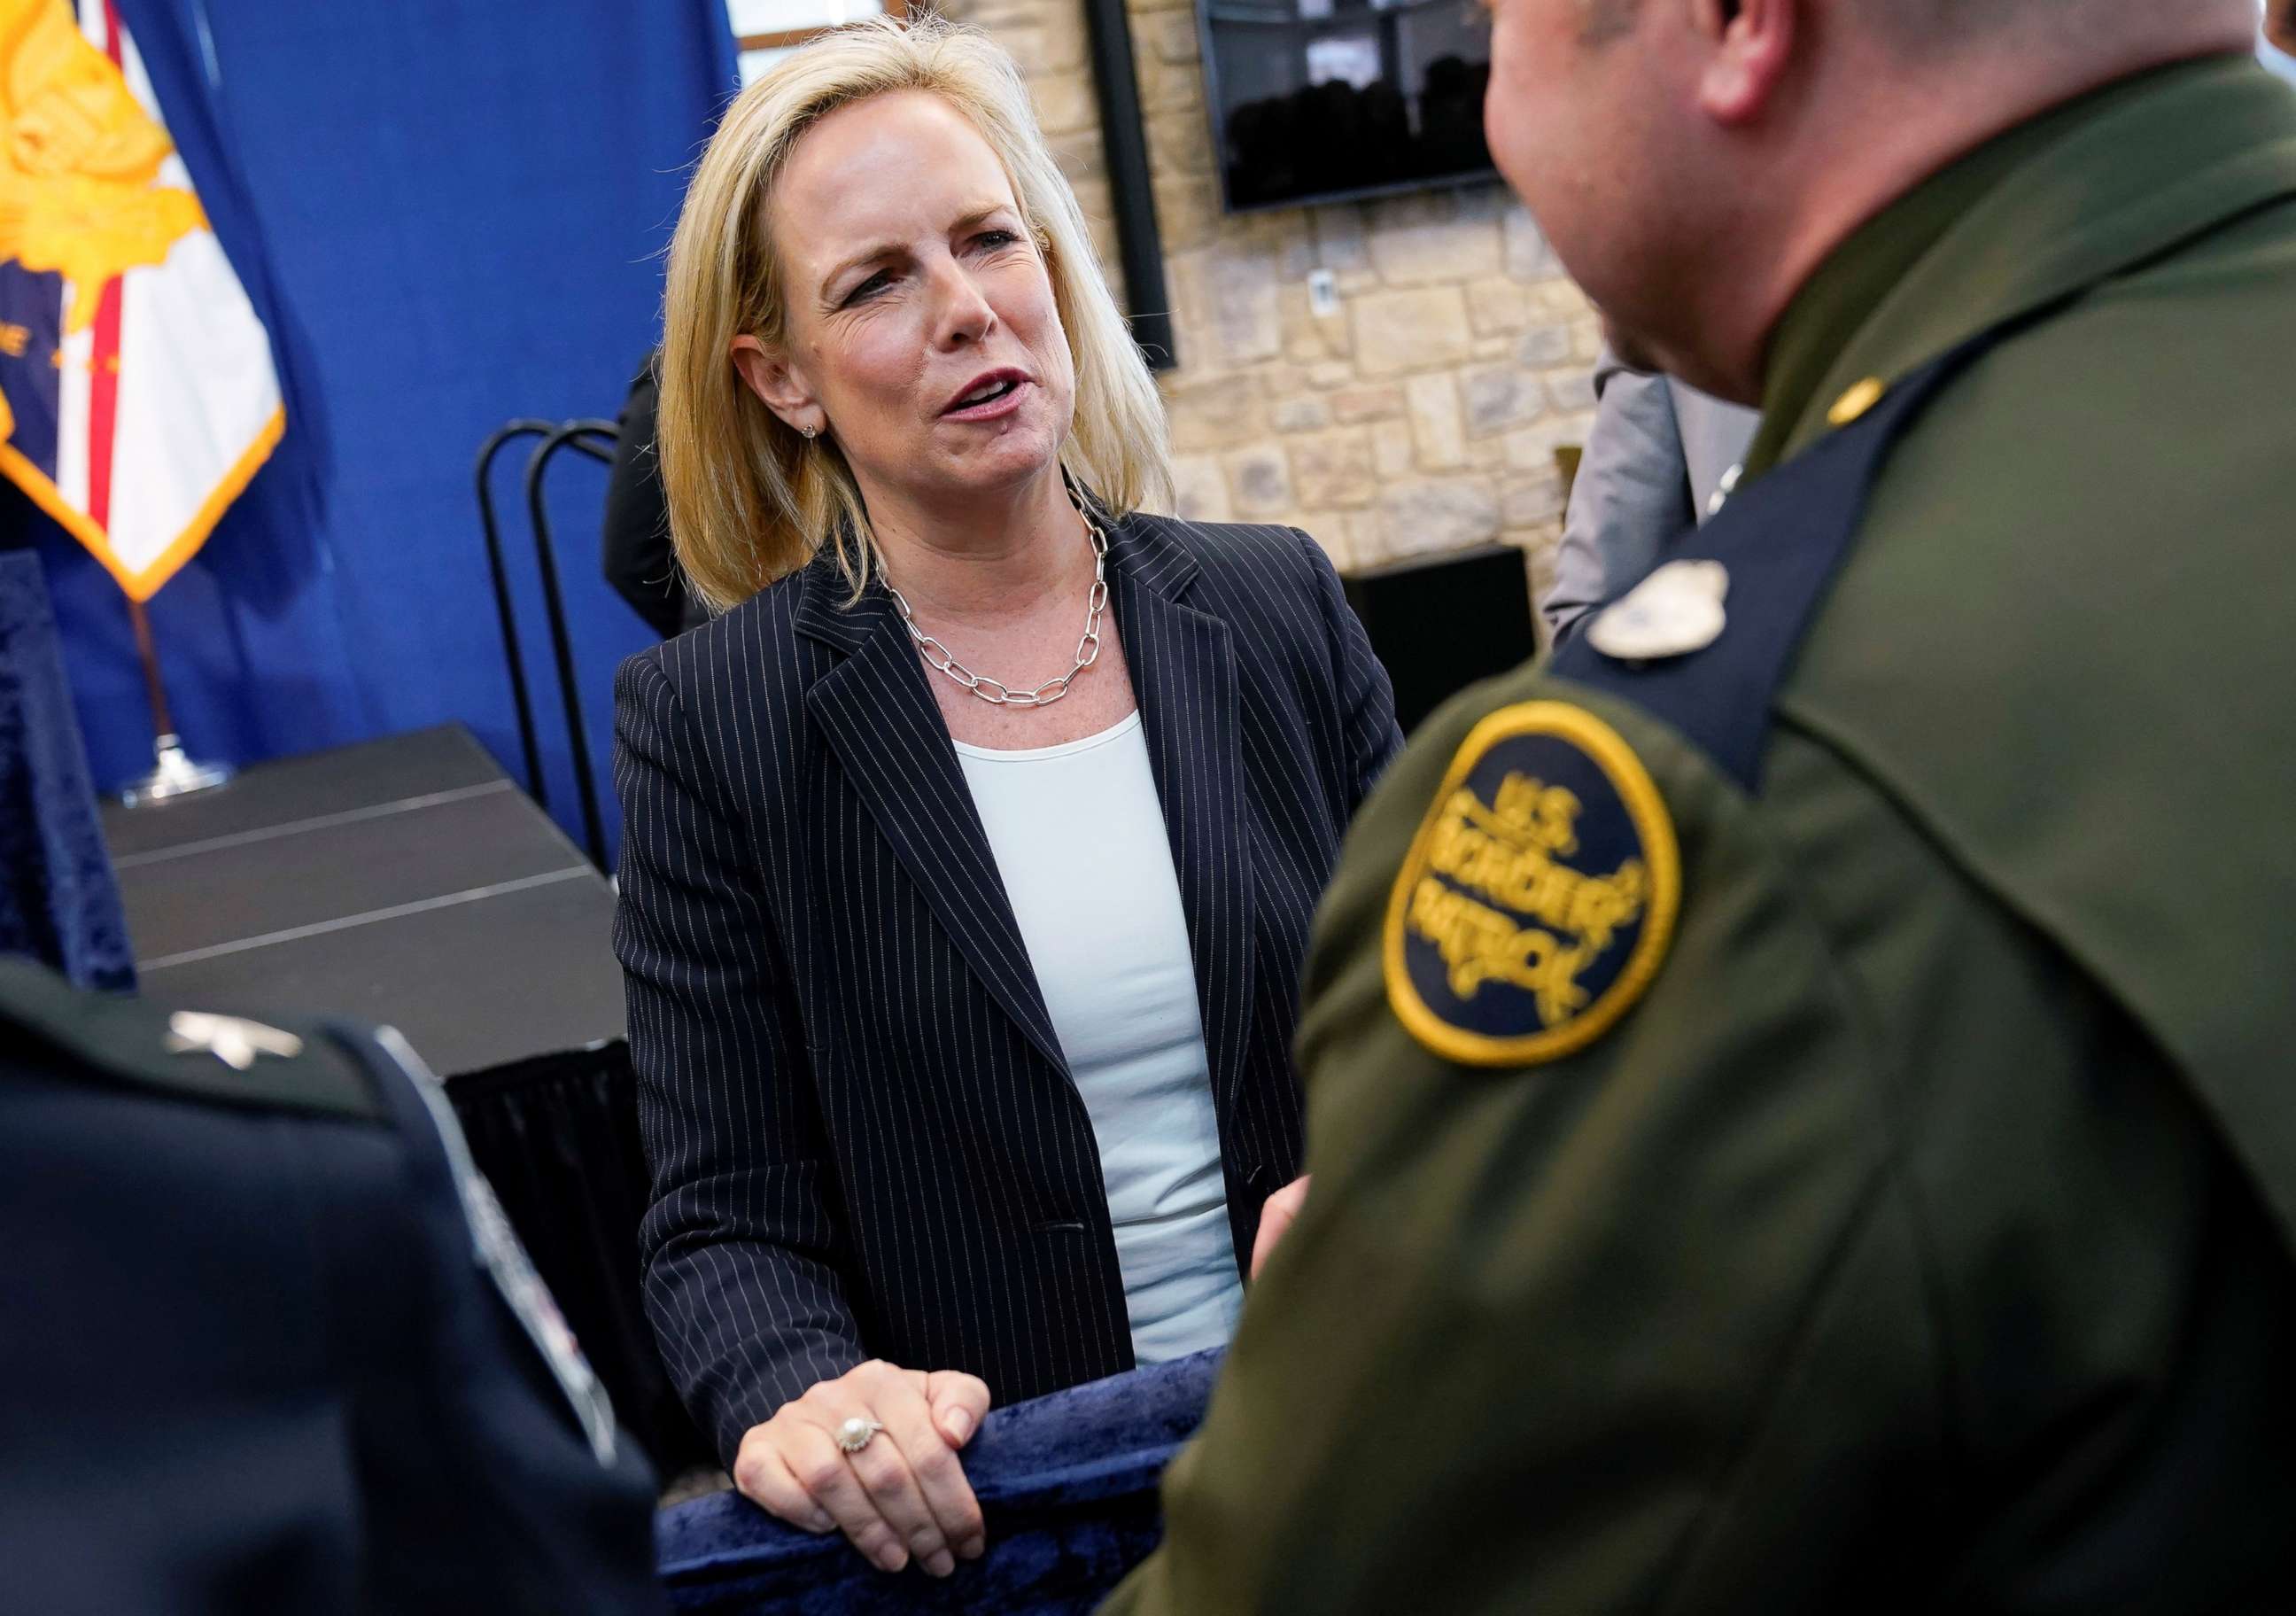 PHOTO: U.S. Secretary of Homeland Security Kirstjen Nielsen greets a member of the U.S. Border Patrol at the U.S. Customs and Border Protection Advanced Training Facility in Harpers Ferry, West Virginia, U.S., March 13, 2019.      REUTERS/Joshua Roberts